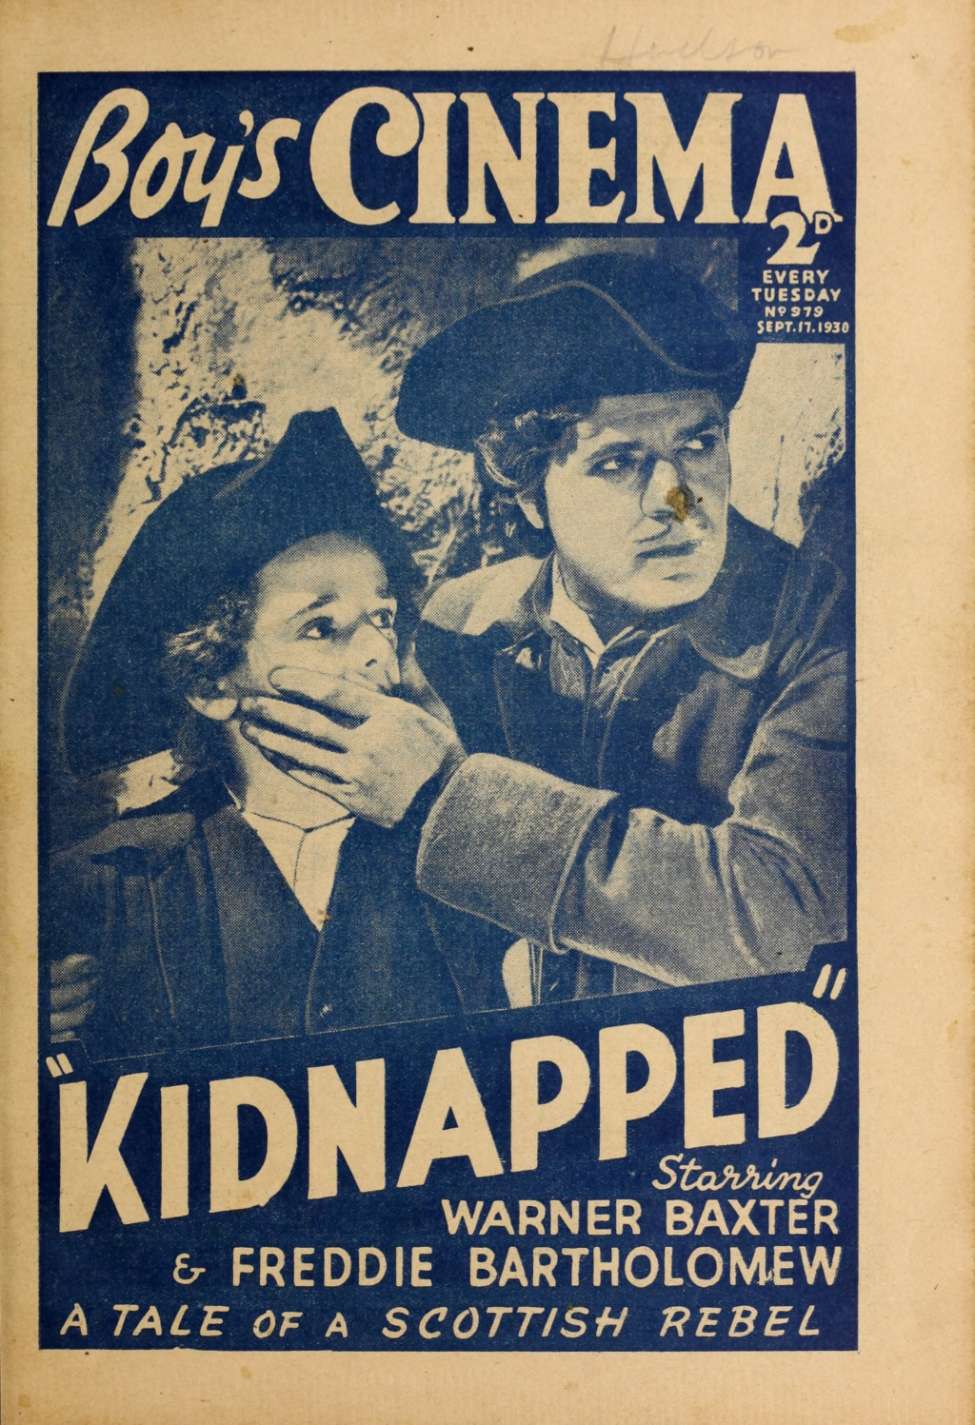 Comic Book Cover For Boy's Cinema 979 - Kidnapped - Warner Baxter